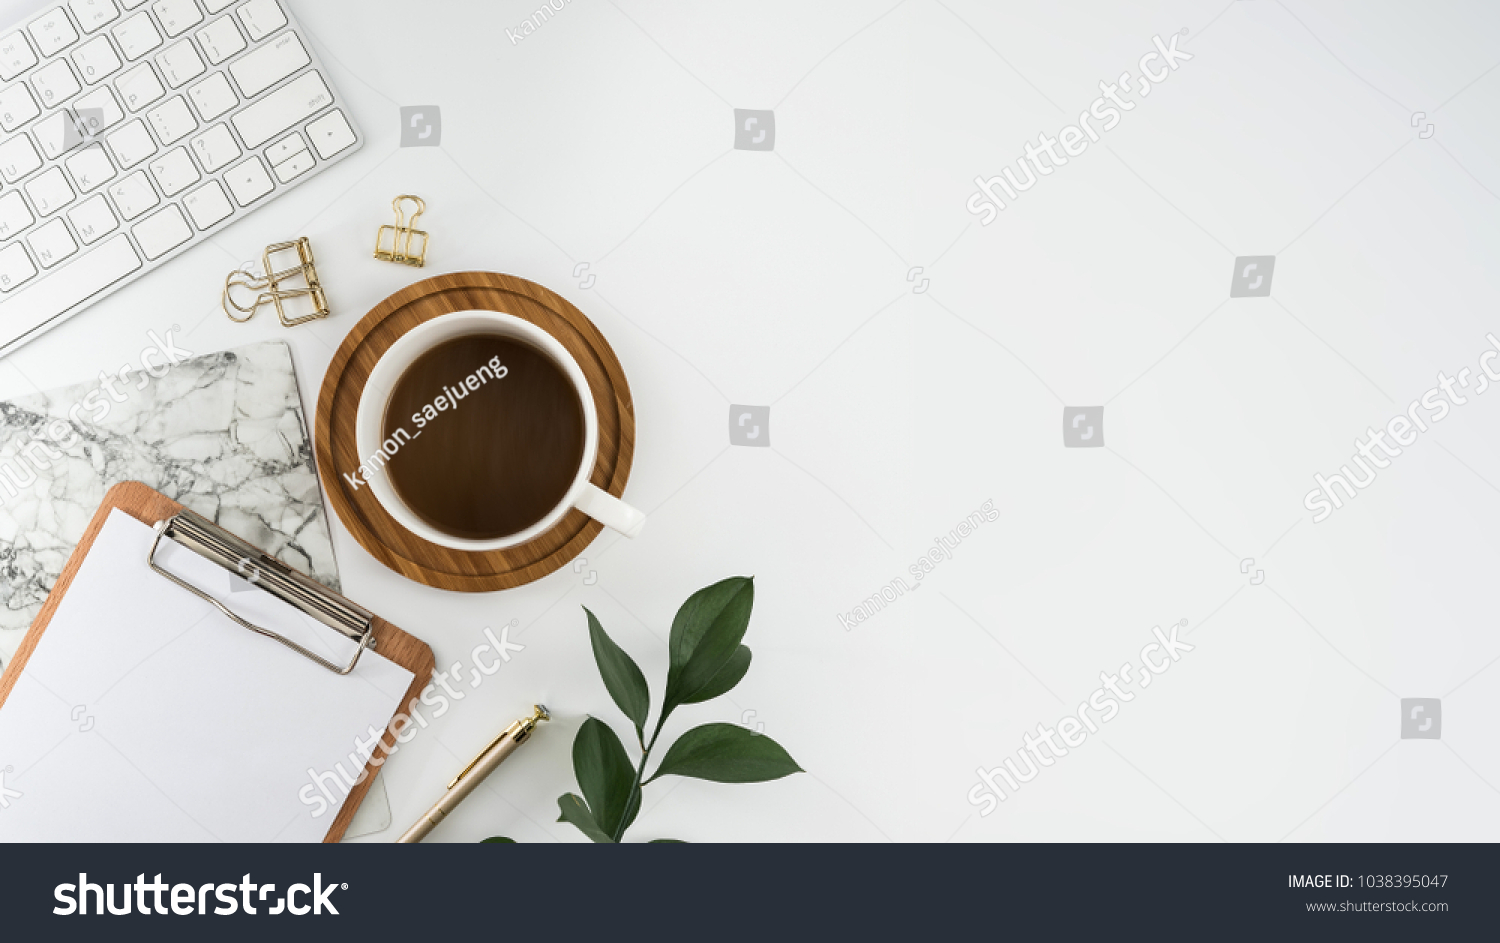 Flat lay, top view office table desk. Workspace with blank clip board, keyboard, office supplies, pencil, green leaf, and coffee cup on white background. #1038395047